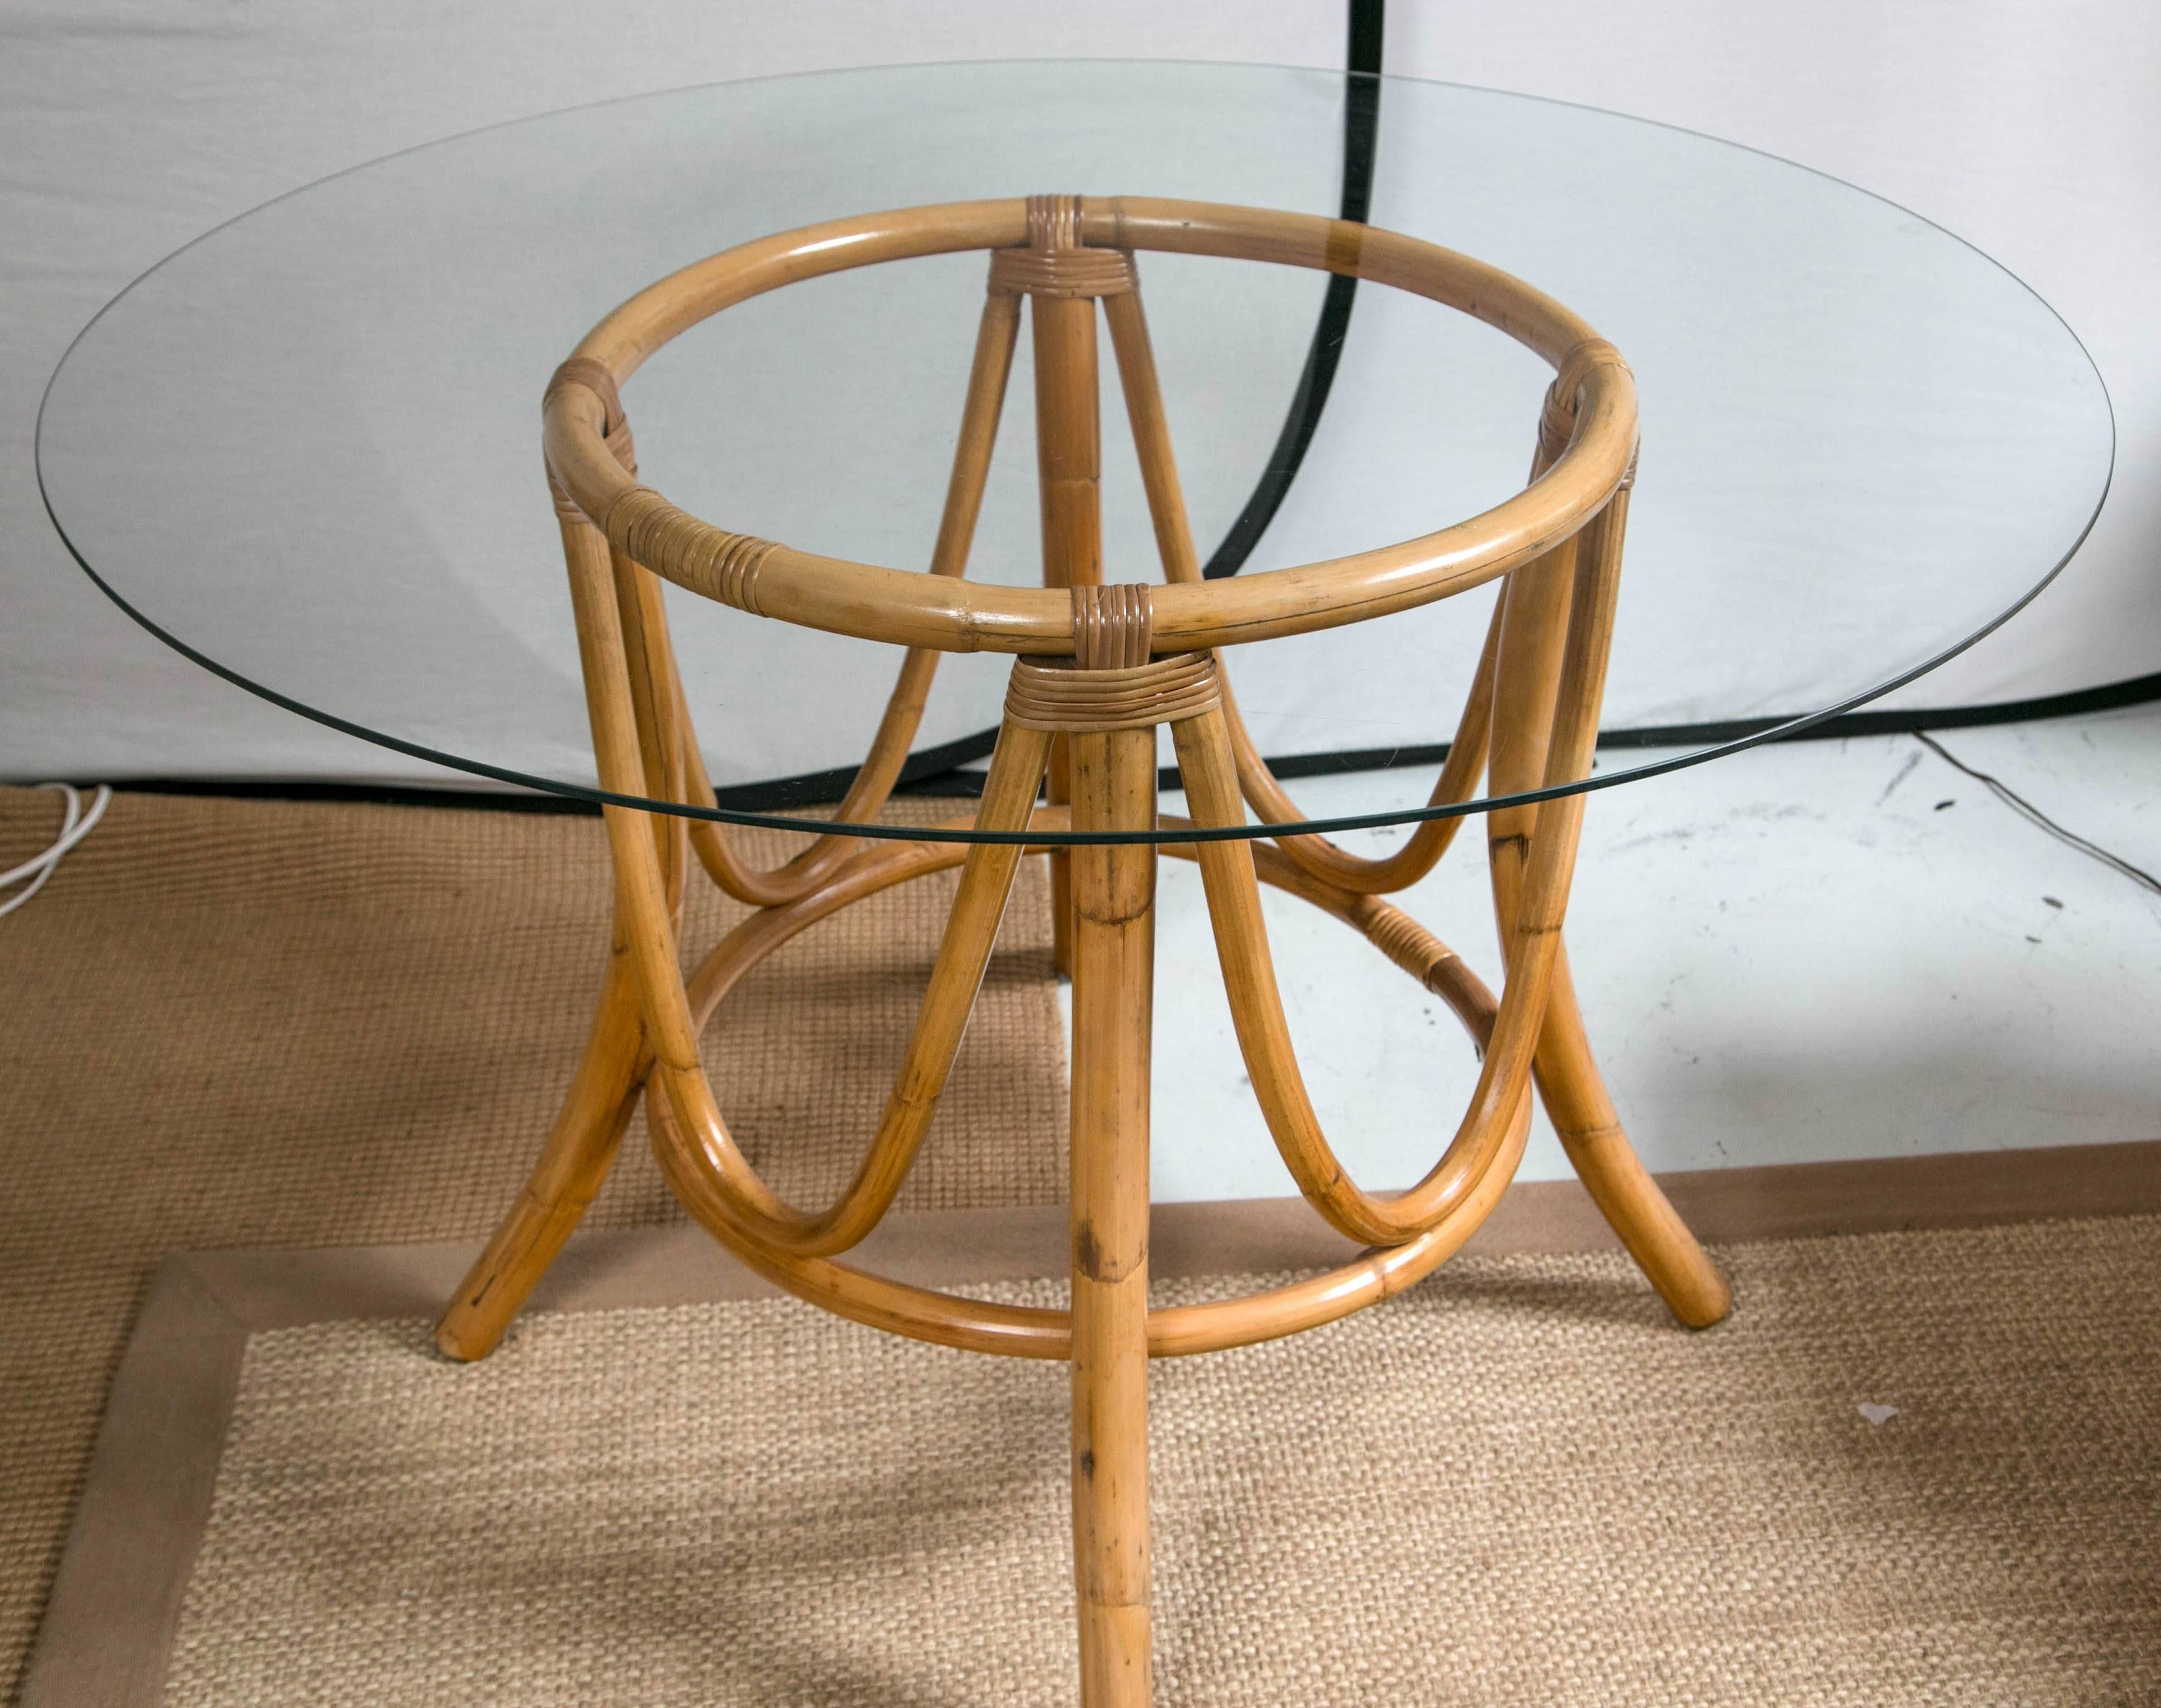 American Vintage Bamboo, Rattan, Round Dining Table and Chairs